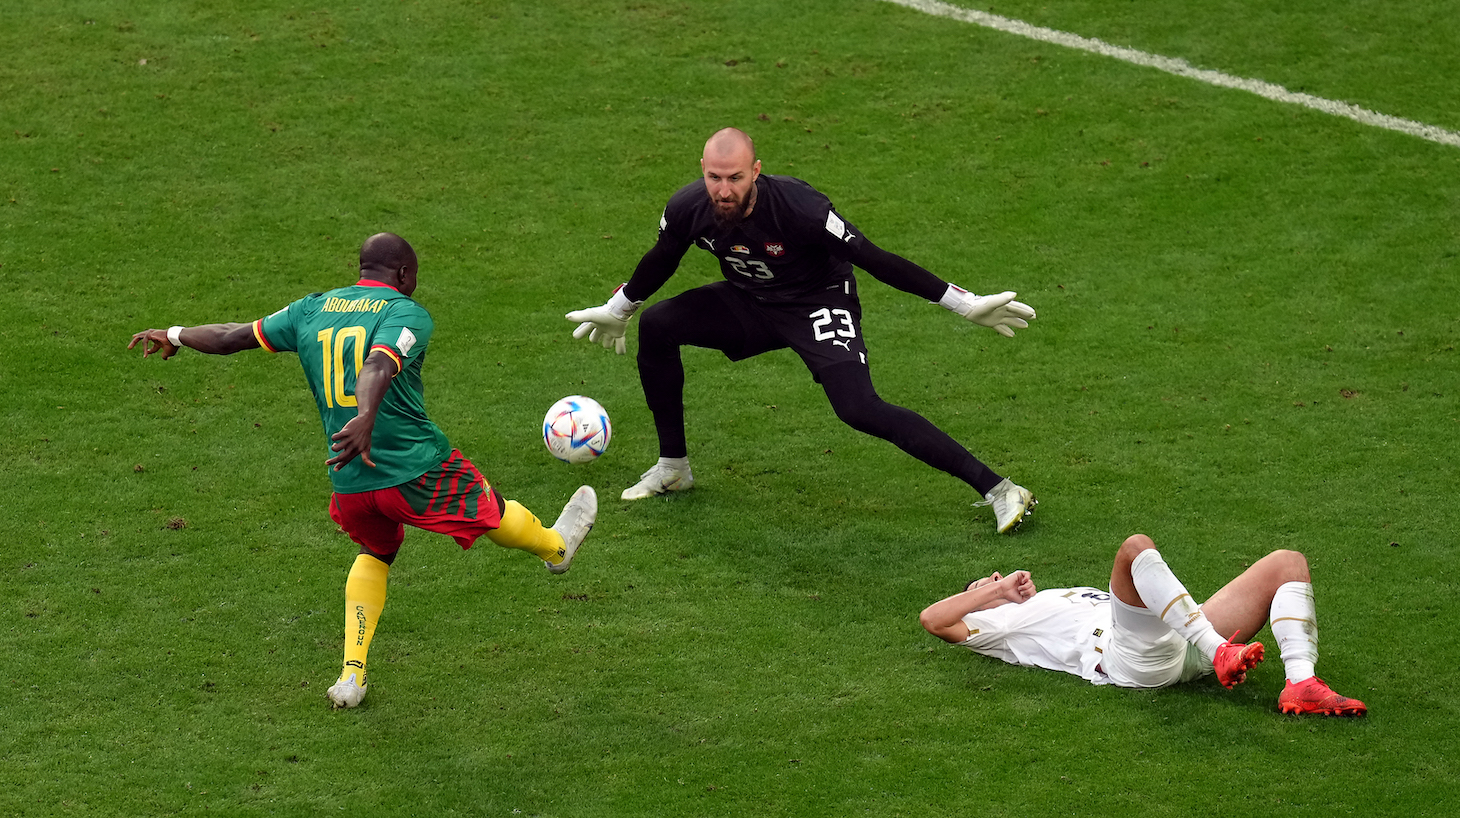 Cameroon's Vincent Aboubakar scores their side's second goal of the game during the FIFA World Cup Group G match at the Al Janoub Stadium in Al Wakrah, Qatar.